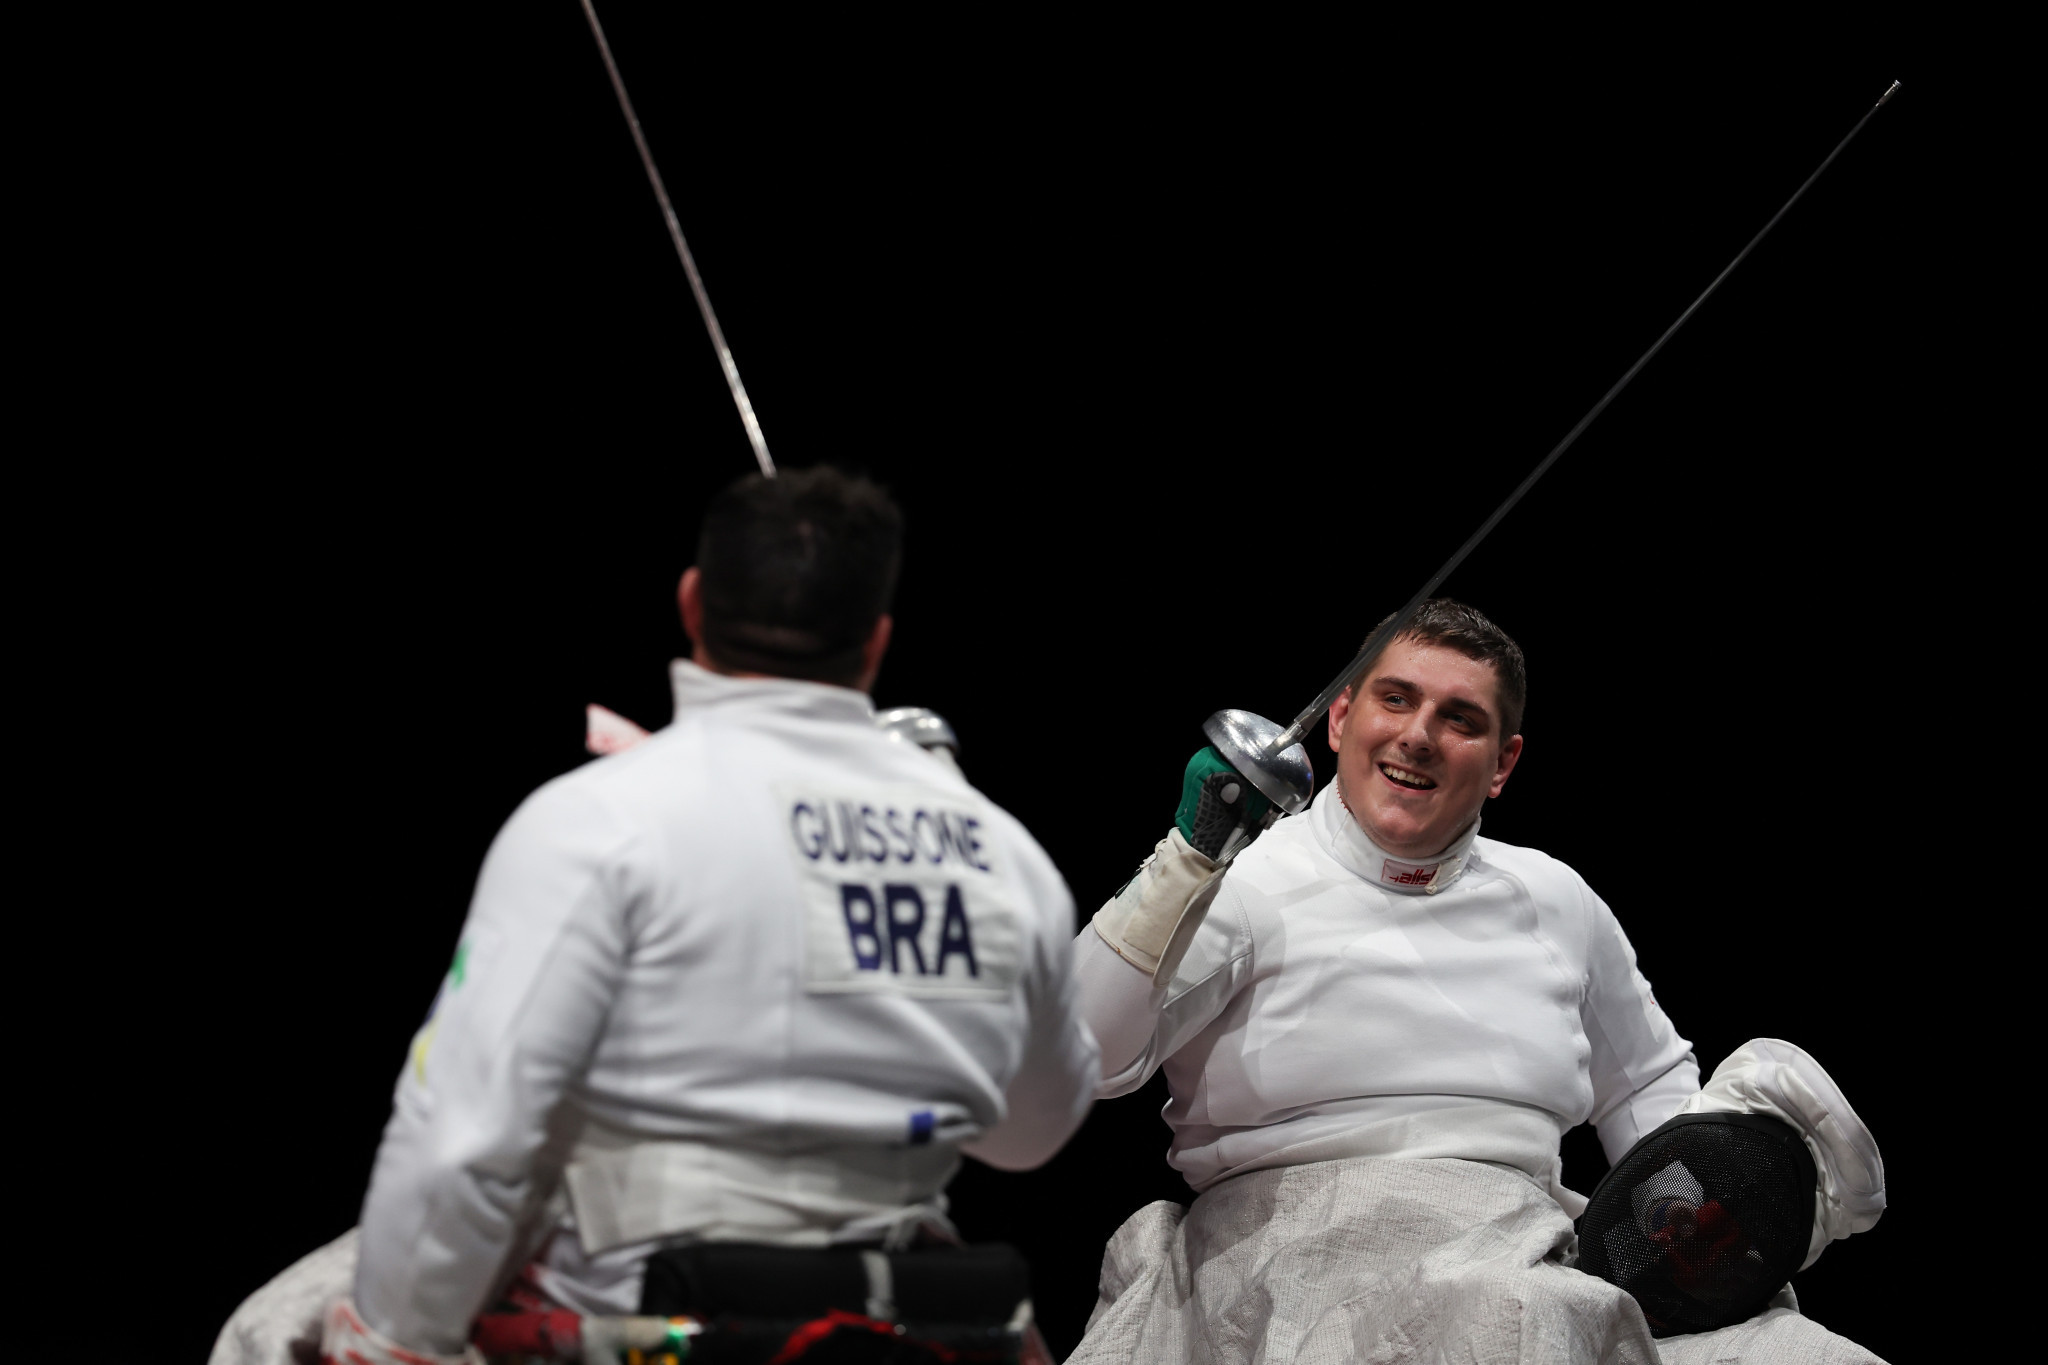 This education programme looks to increase participation in wheelchair fencing ©Getty Images